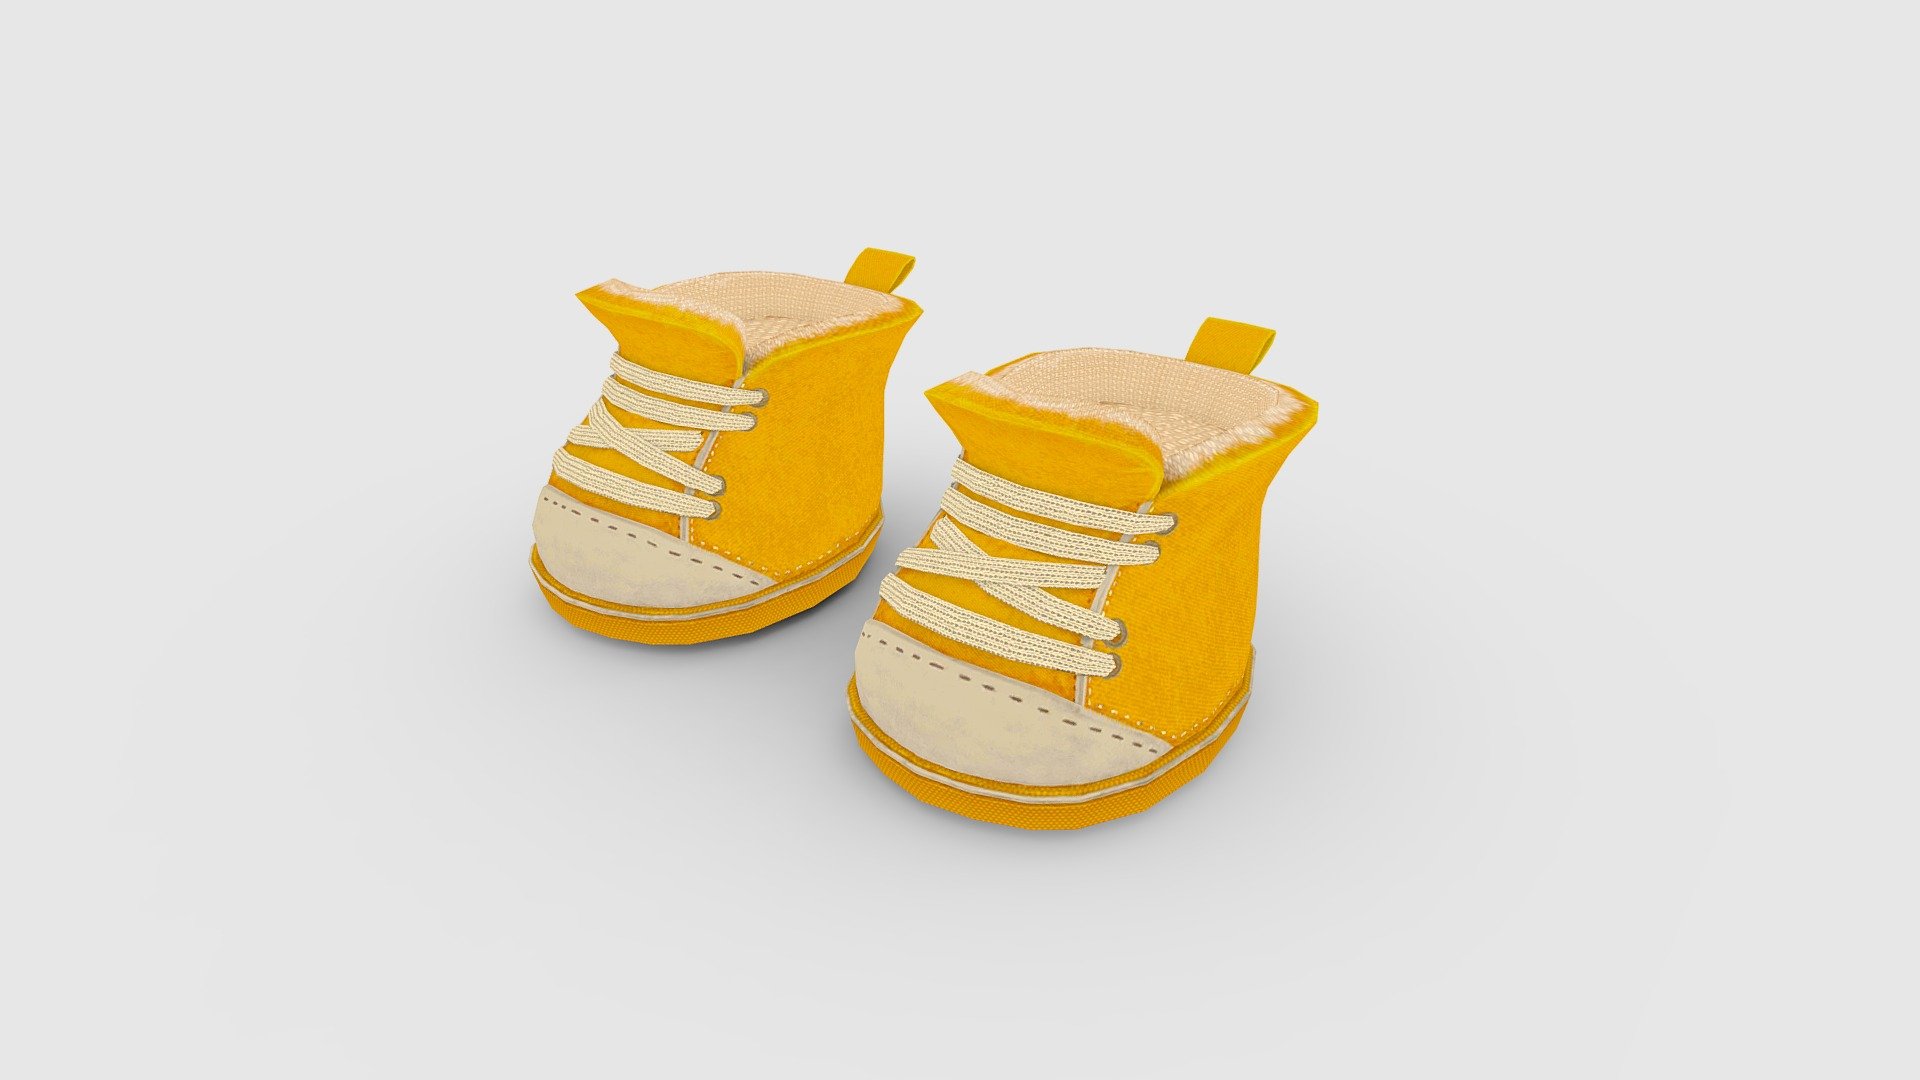 Cartoon baby shoes - yellow cotton-padded shoes Low-poly 3D model - Cartoon baby shoes - yellow cotton-padded shoes - 3D model by ler_cartoon (@lerrrrr) 3d model